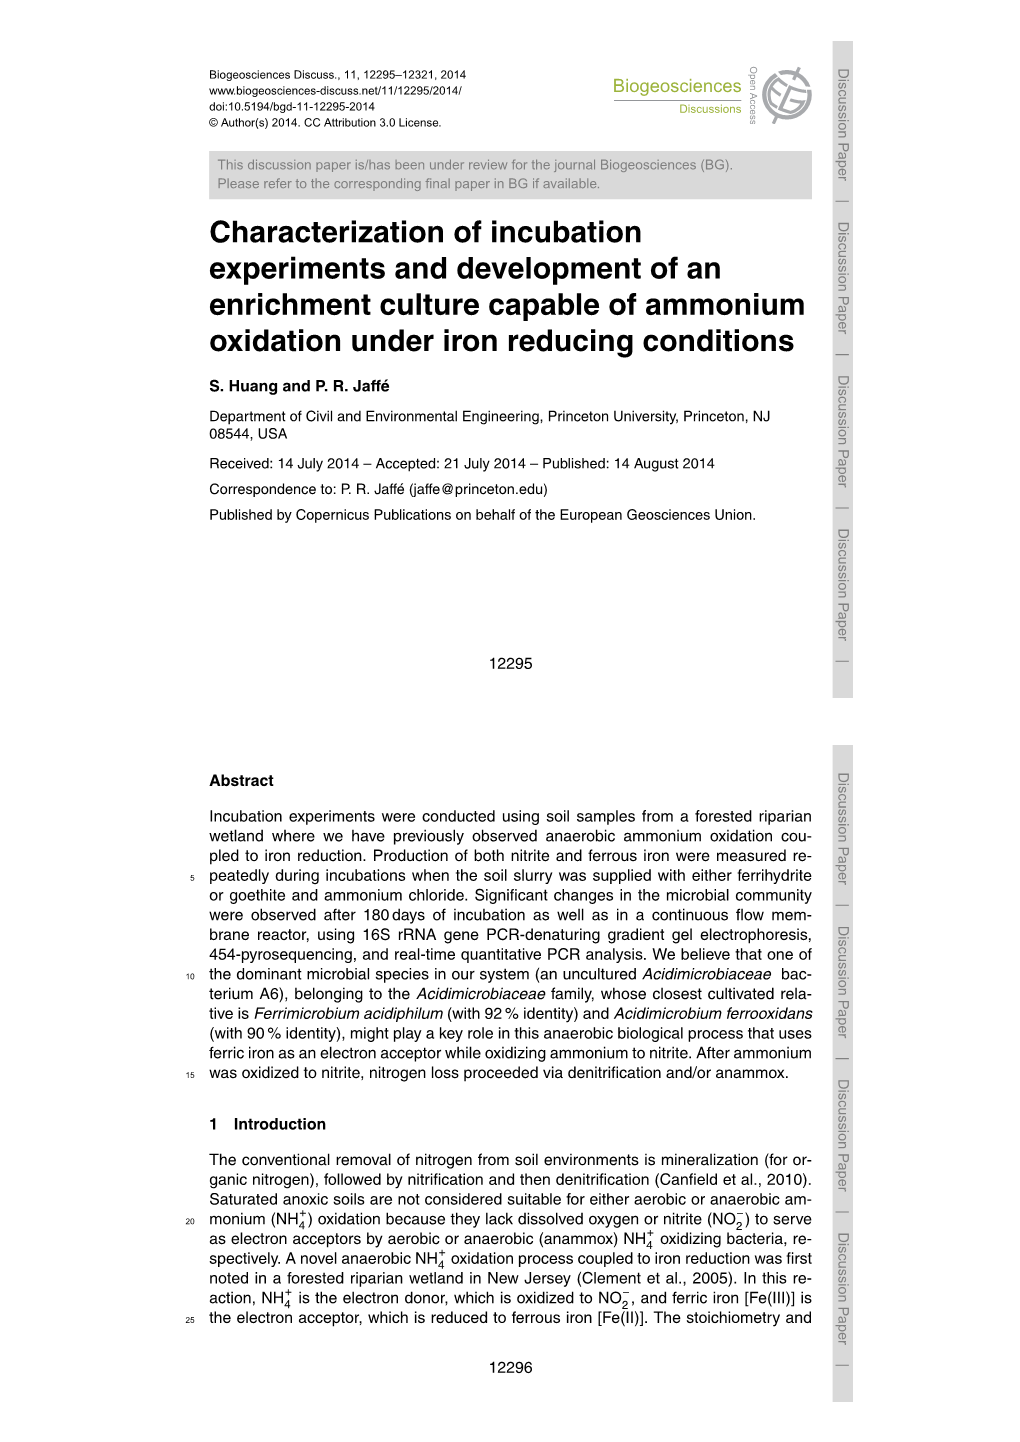 Characterization of Incubation Experiments and Development of an Enrichment Culture Capable of Ammonium Oxidation Under Iron Reducing Conditions S